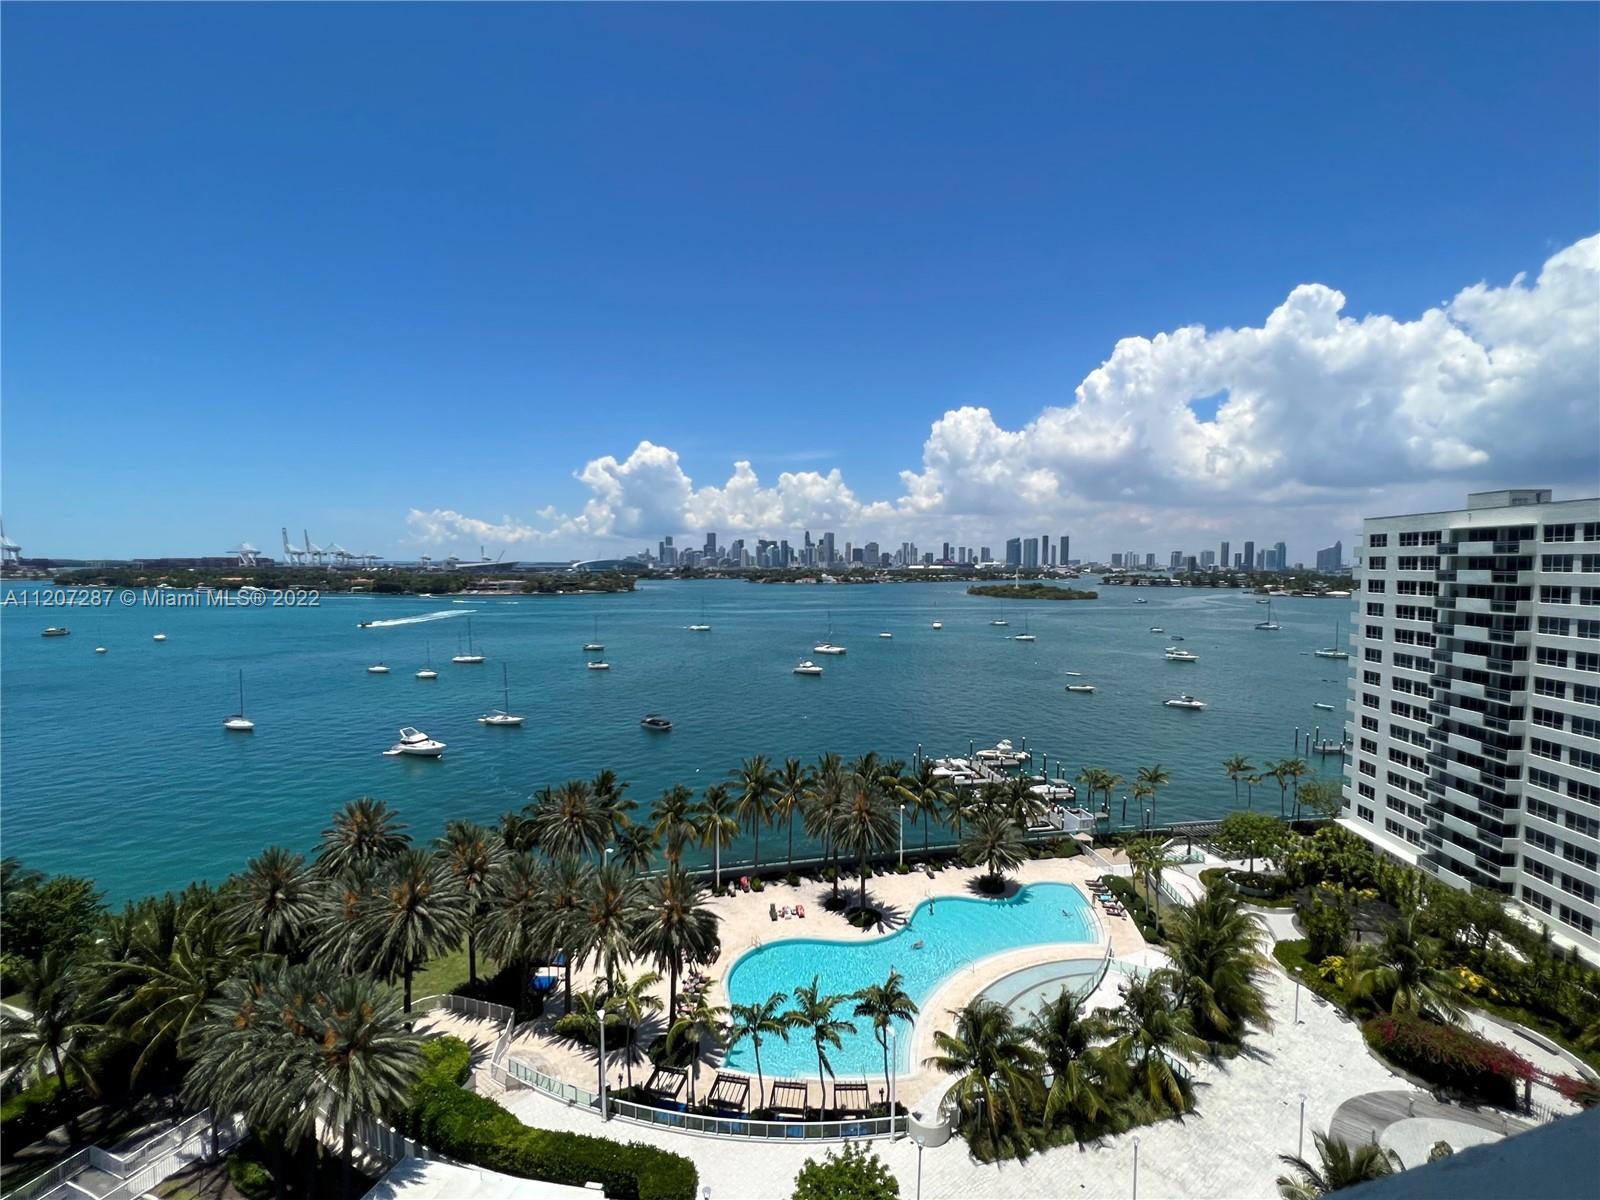 Most Spectacular 3 Bedroom at Flamingo South Beach.  Best Views at the Flamingo. Corner Unit with Tw